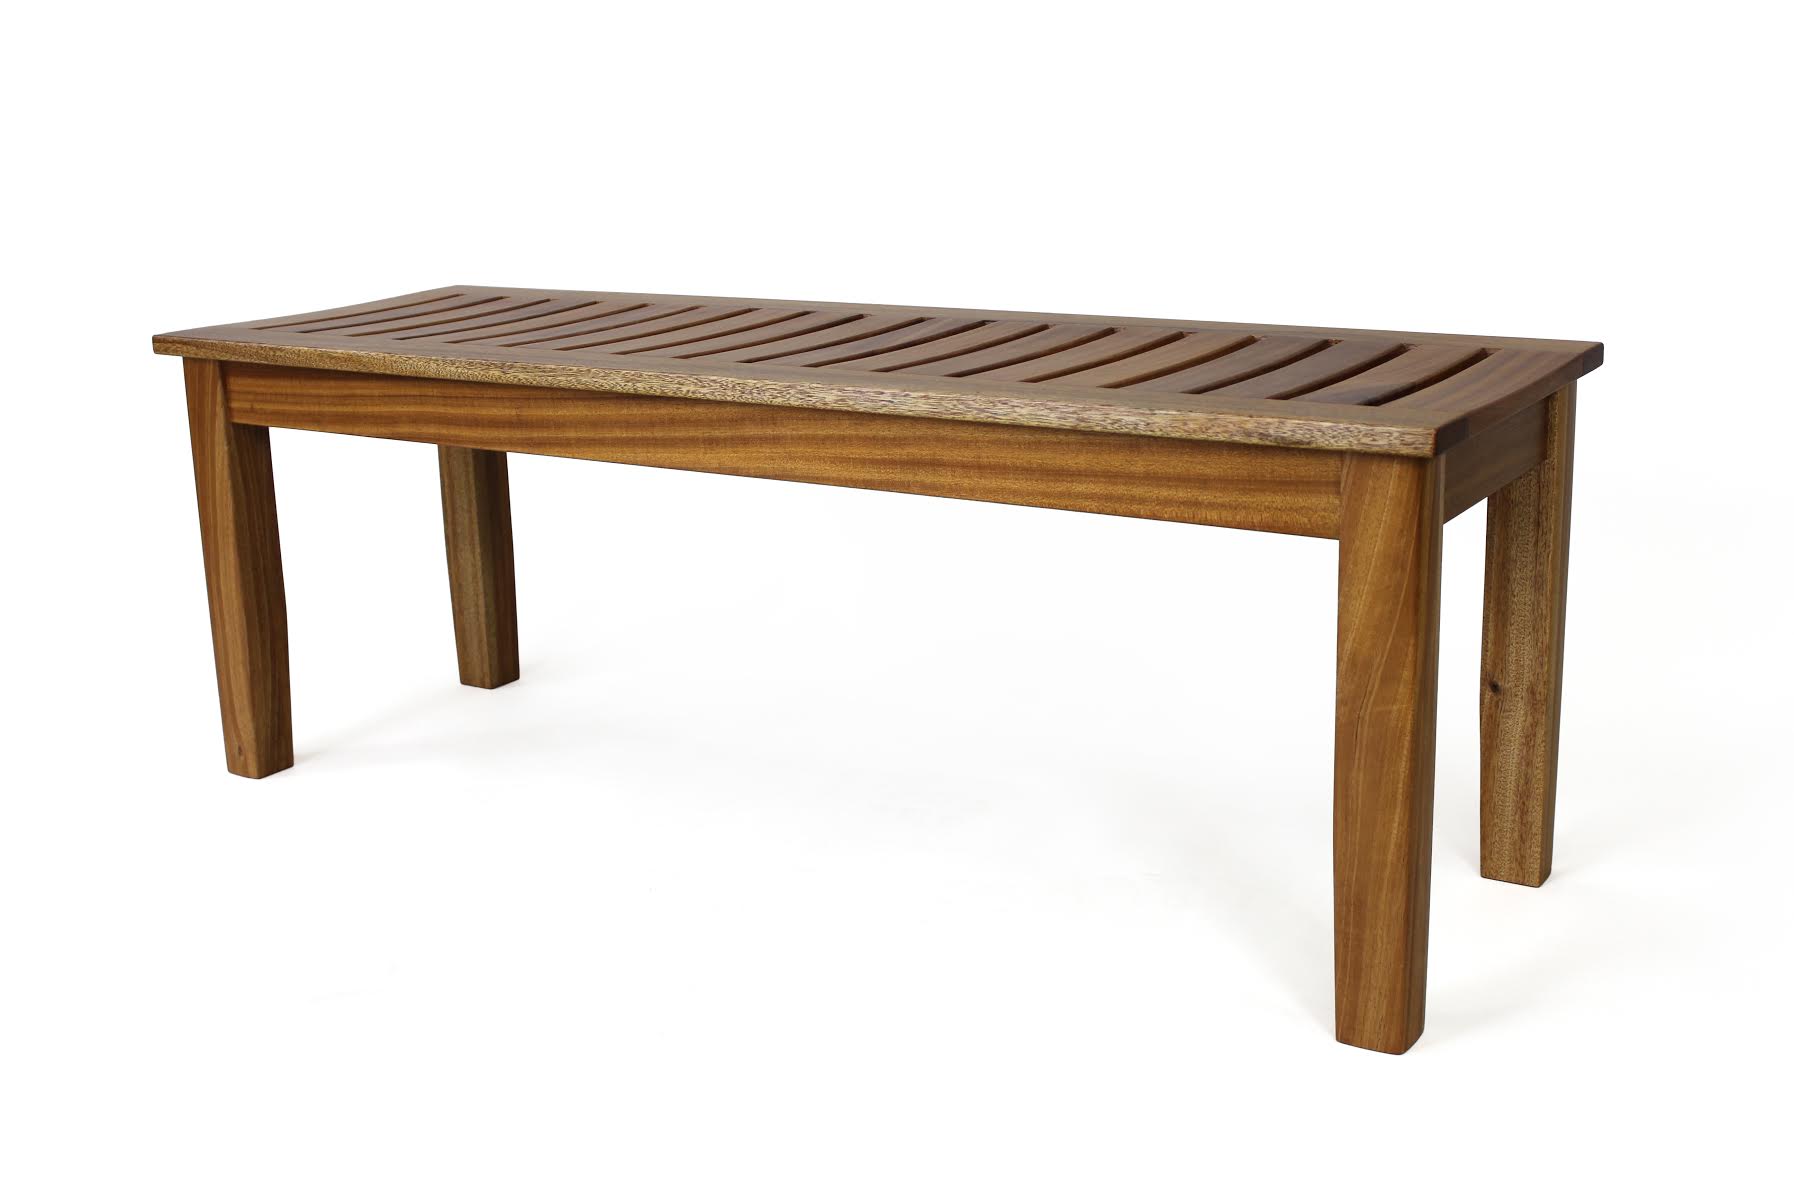 Outdoor Sitting Bench - The Wood Whisperer